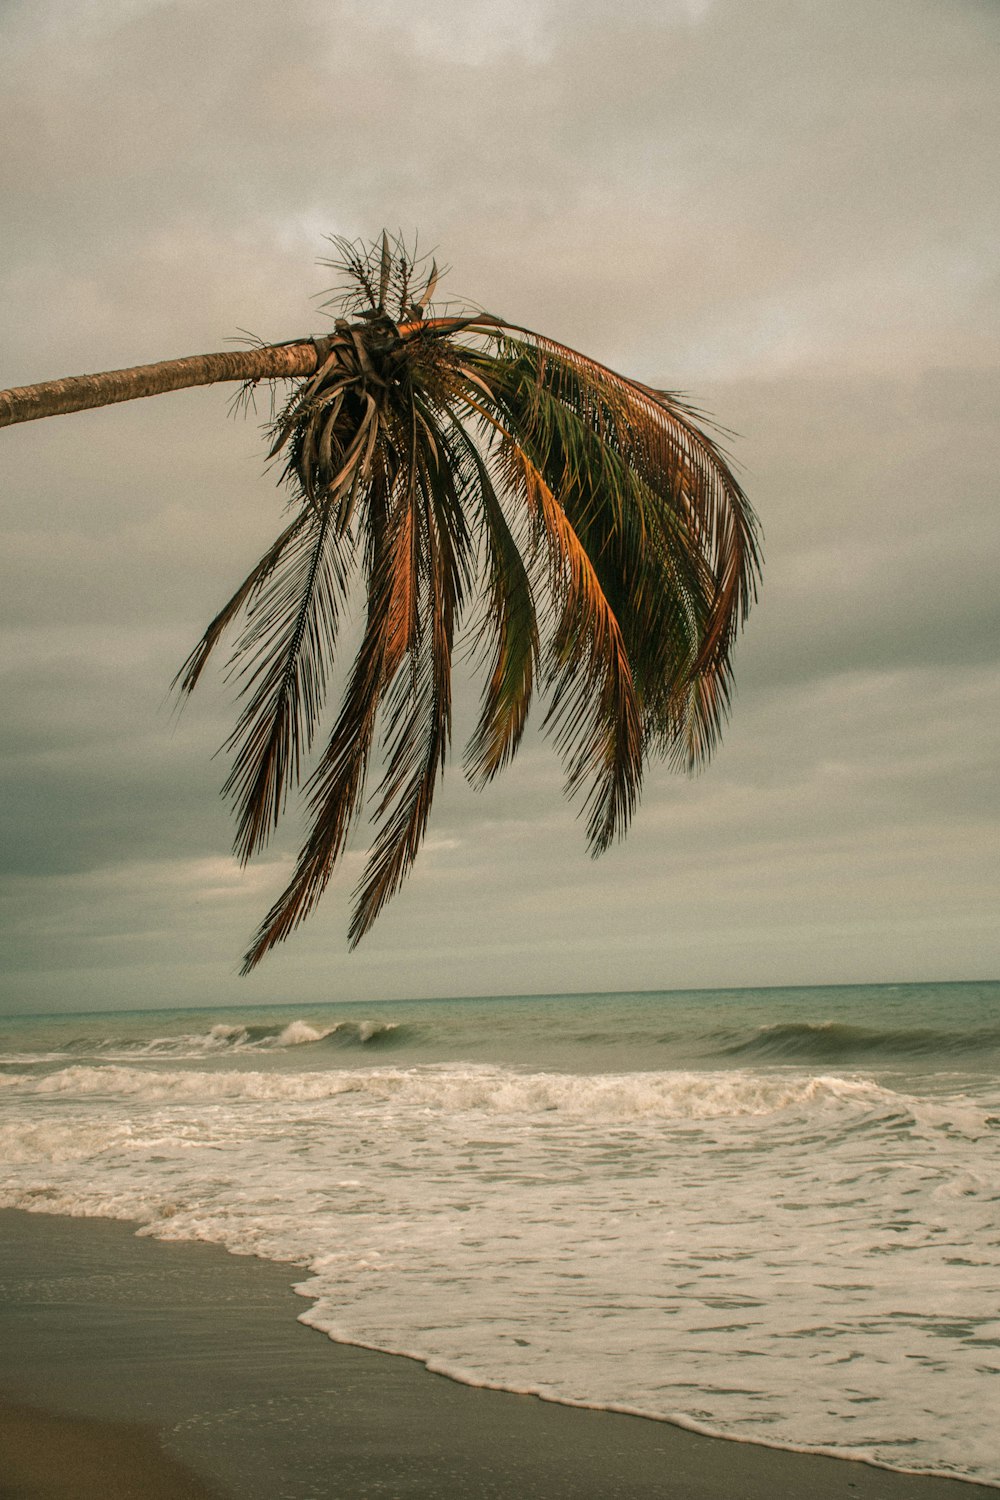 palm tree near sea under cloudy sky during daytime